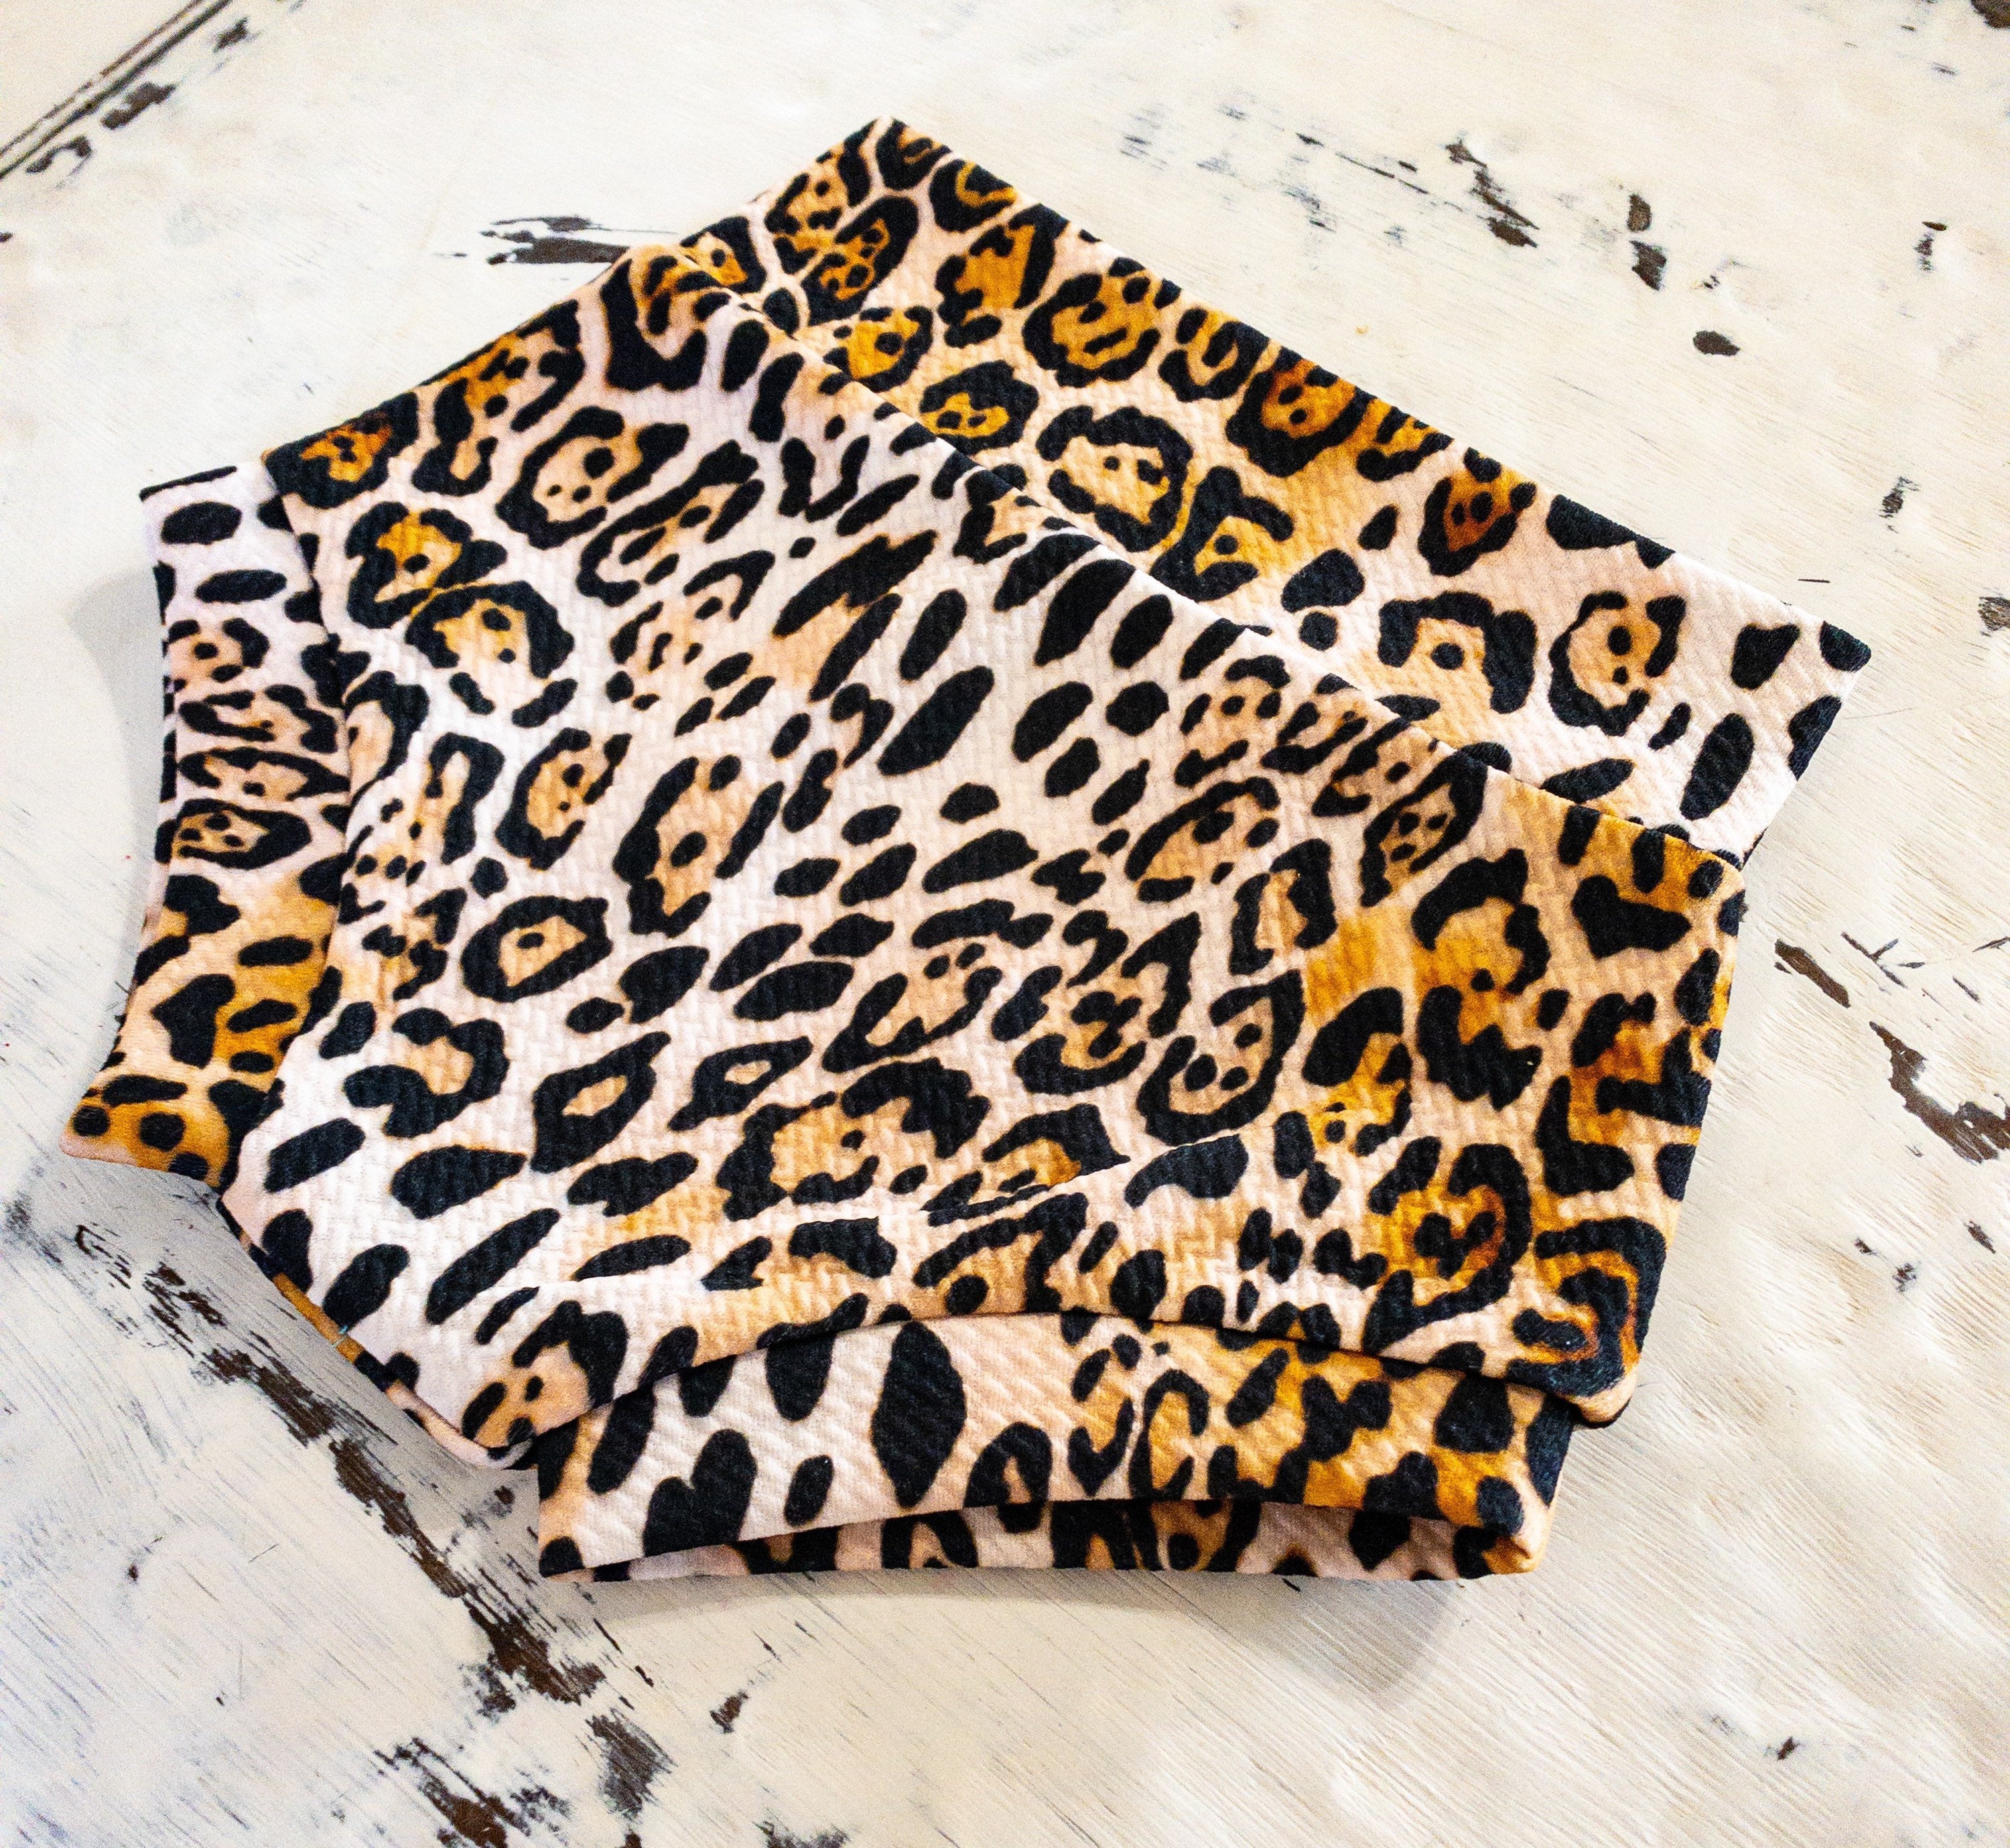 Leopard Print Cheetah Bummie with Fringe or No Fringe